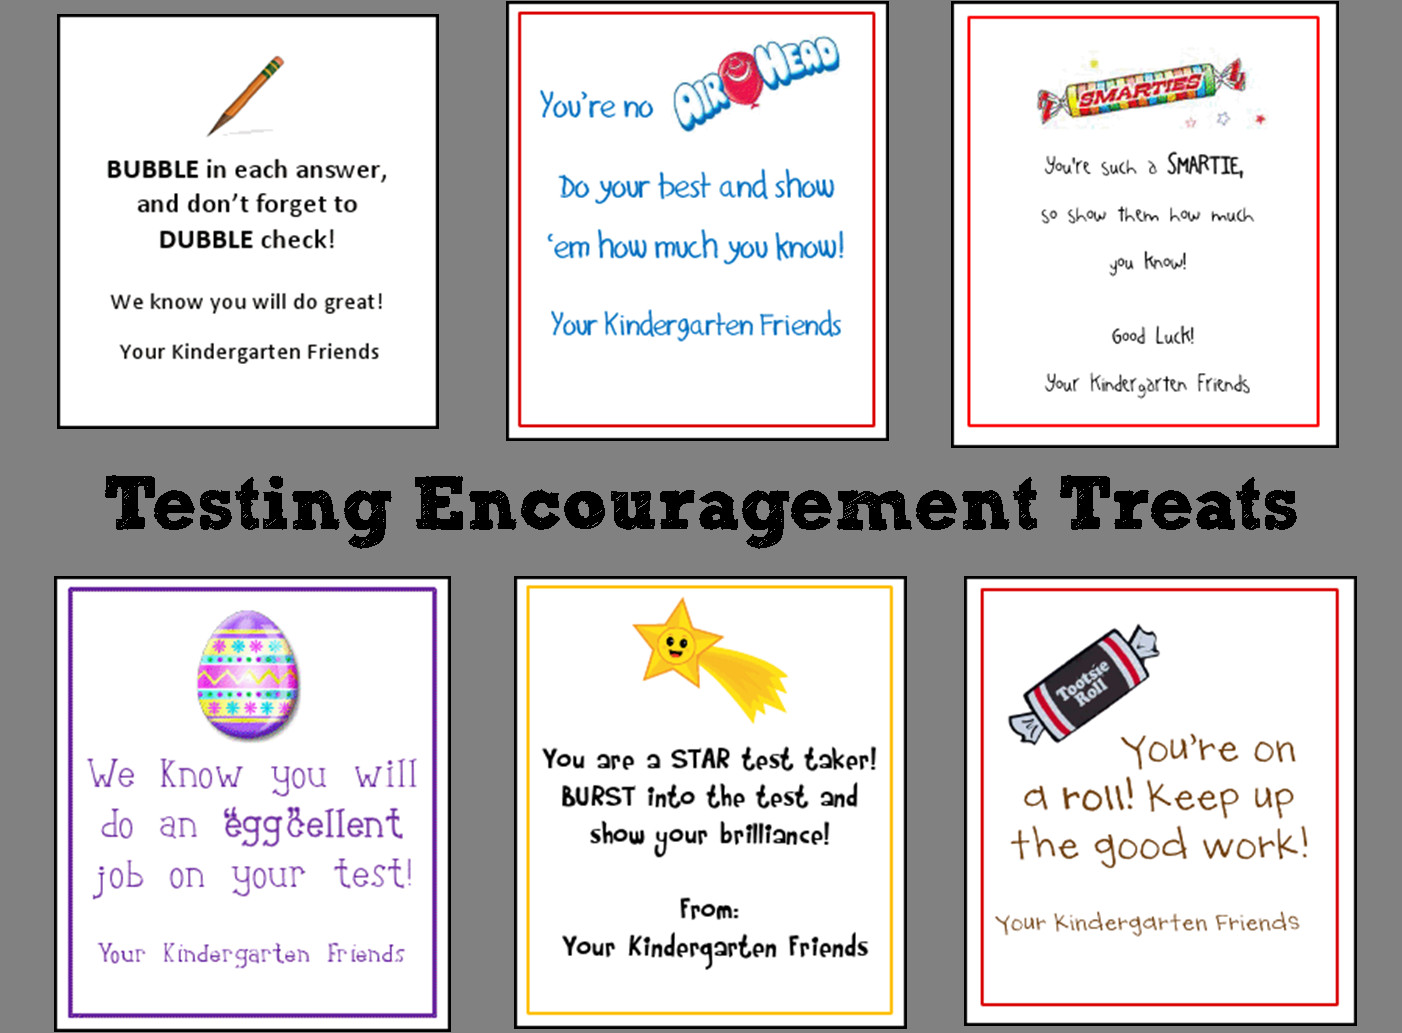 Motivational Testing Quotes
 Encouraging Quotes For Students Taking Tests QuotesGram